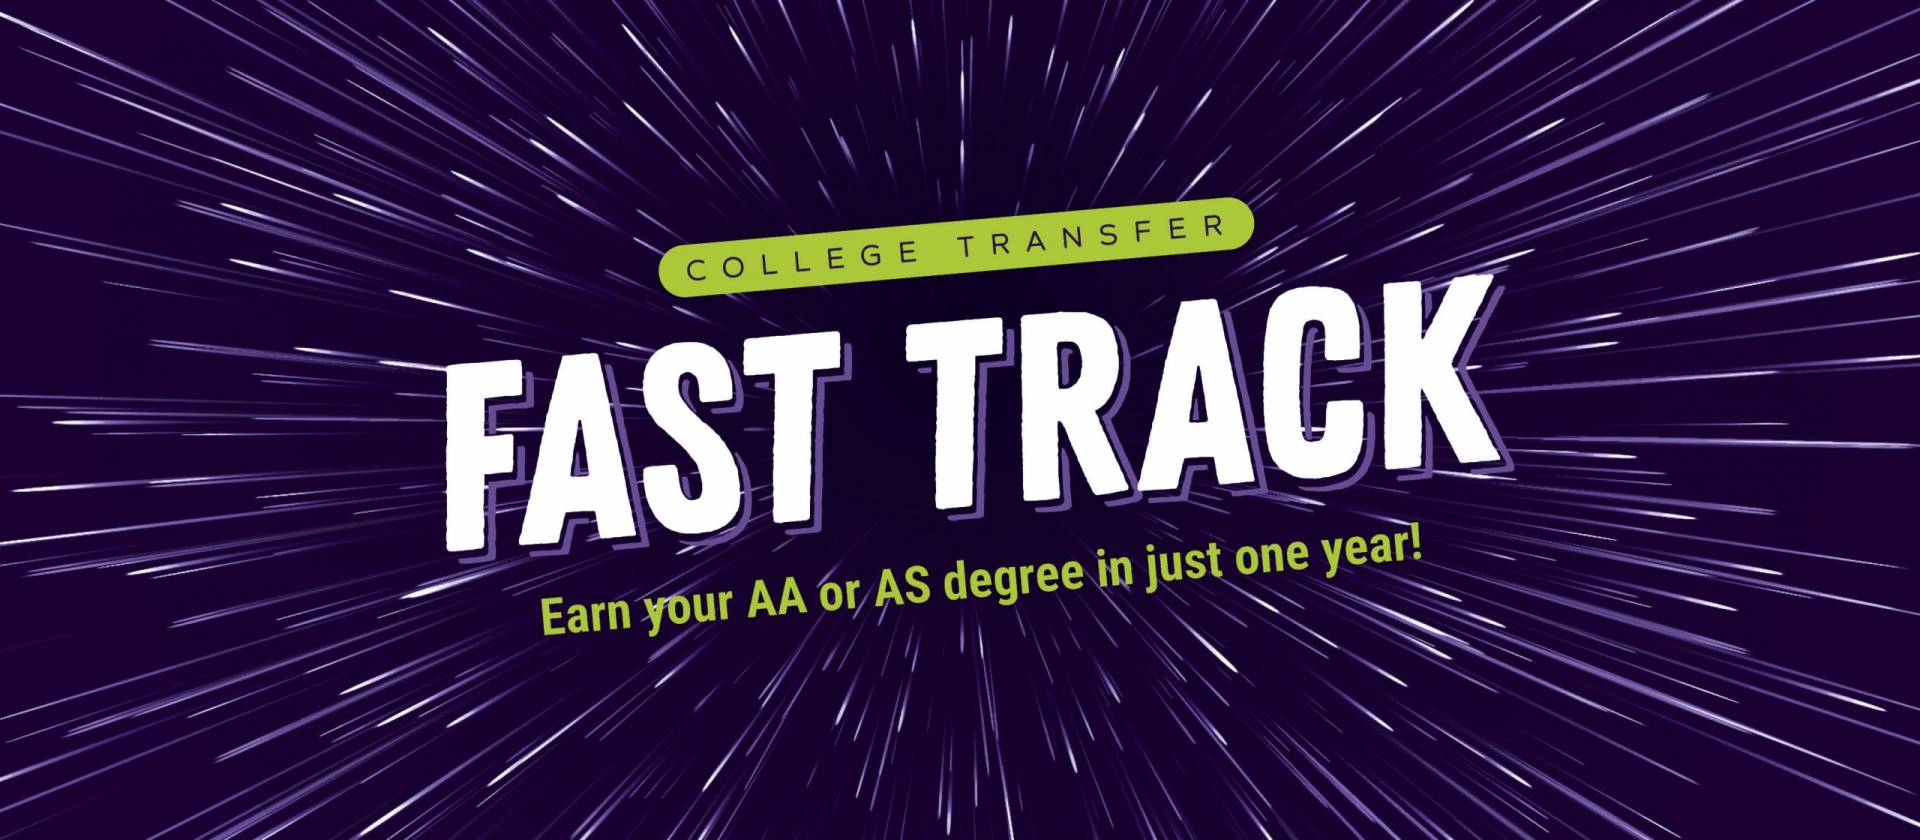 College Transfer Fast Track, Earn Your AA or AS degree 